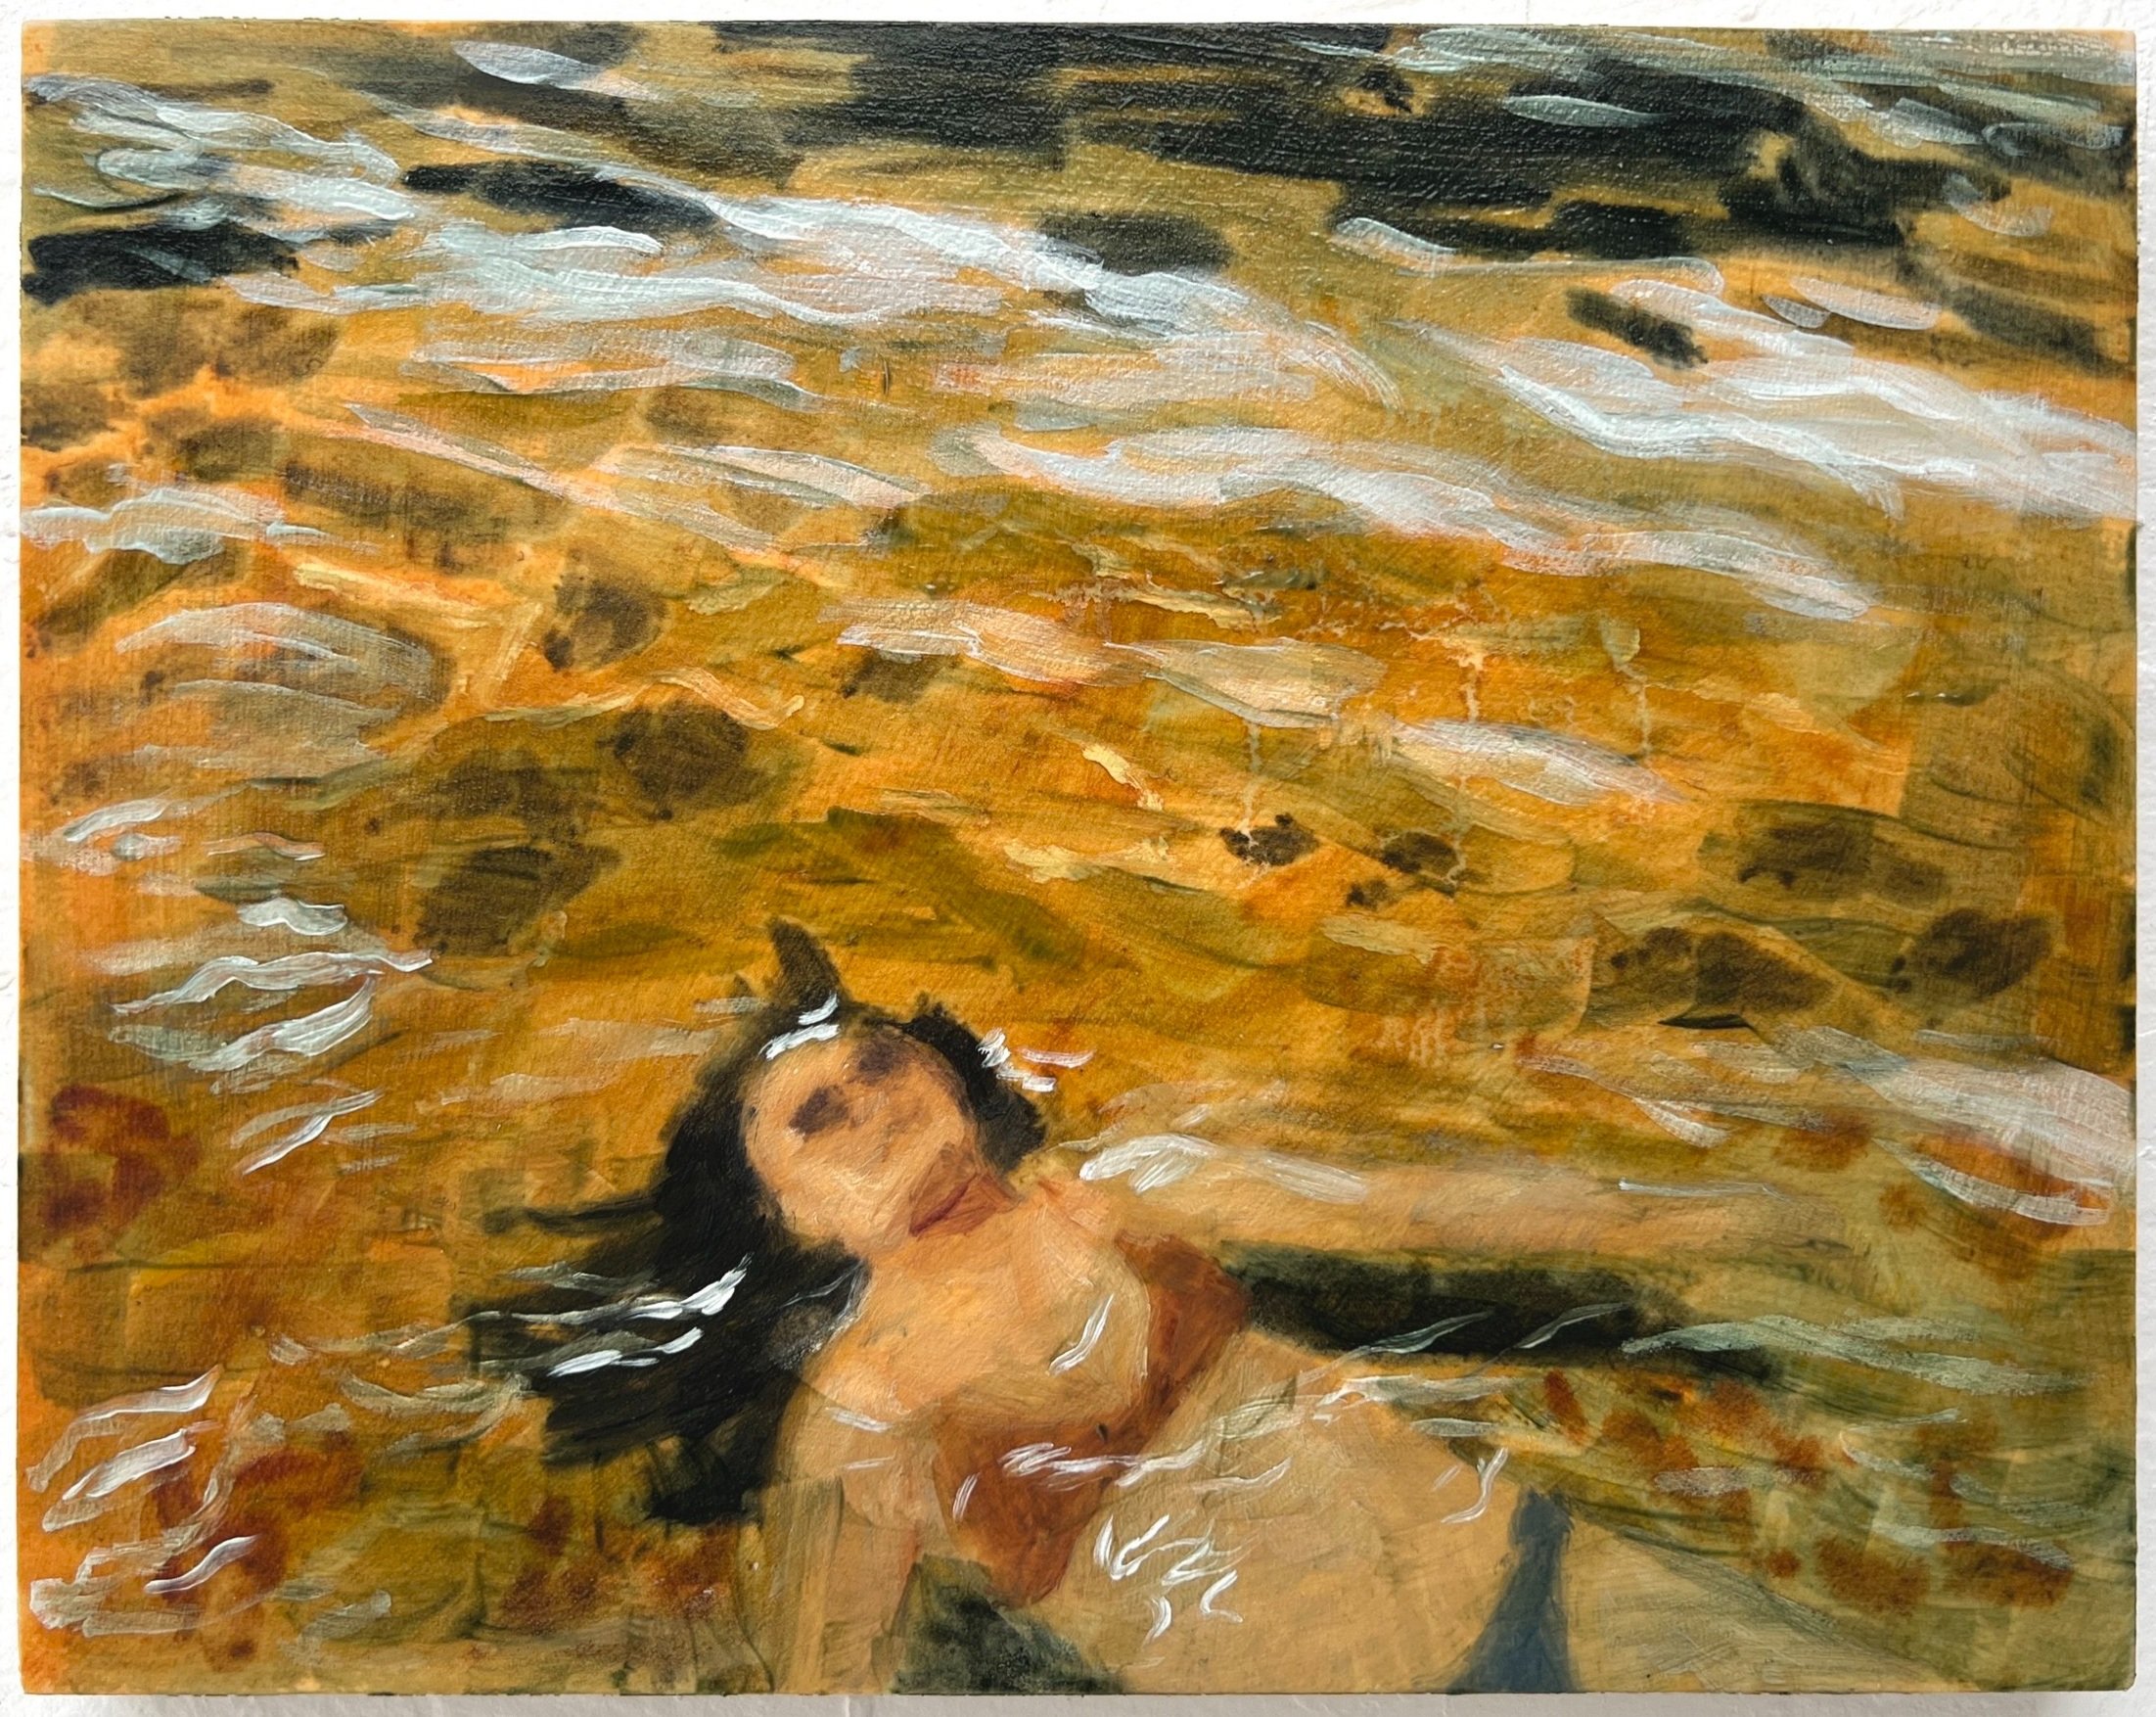   Suzie swimming in sunny shallows  by Kennedy Harwood 